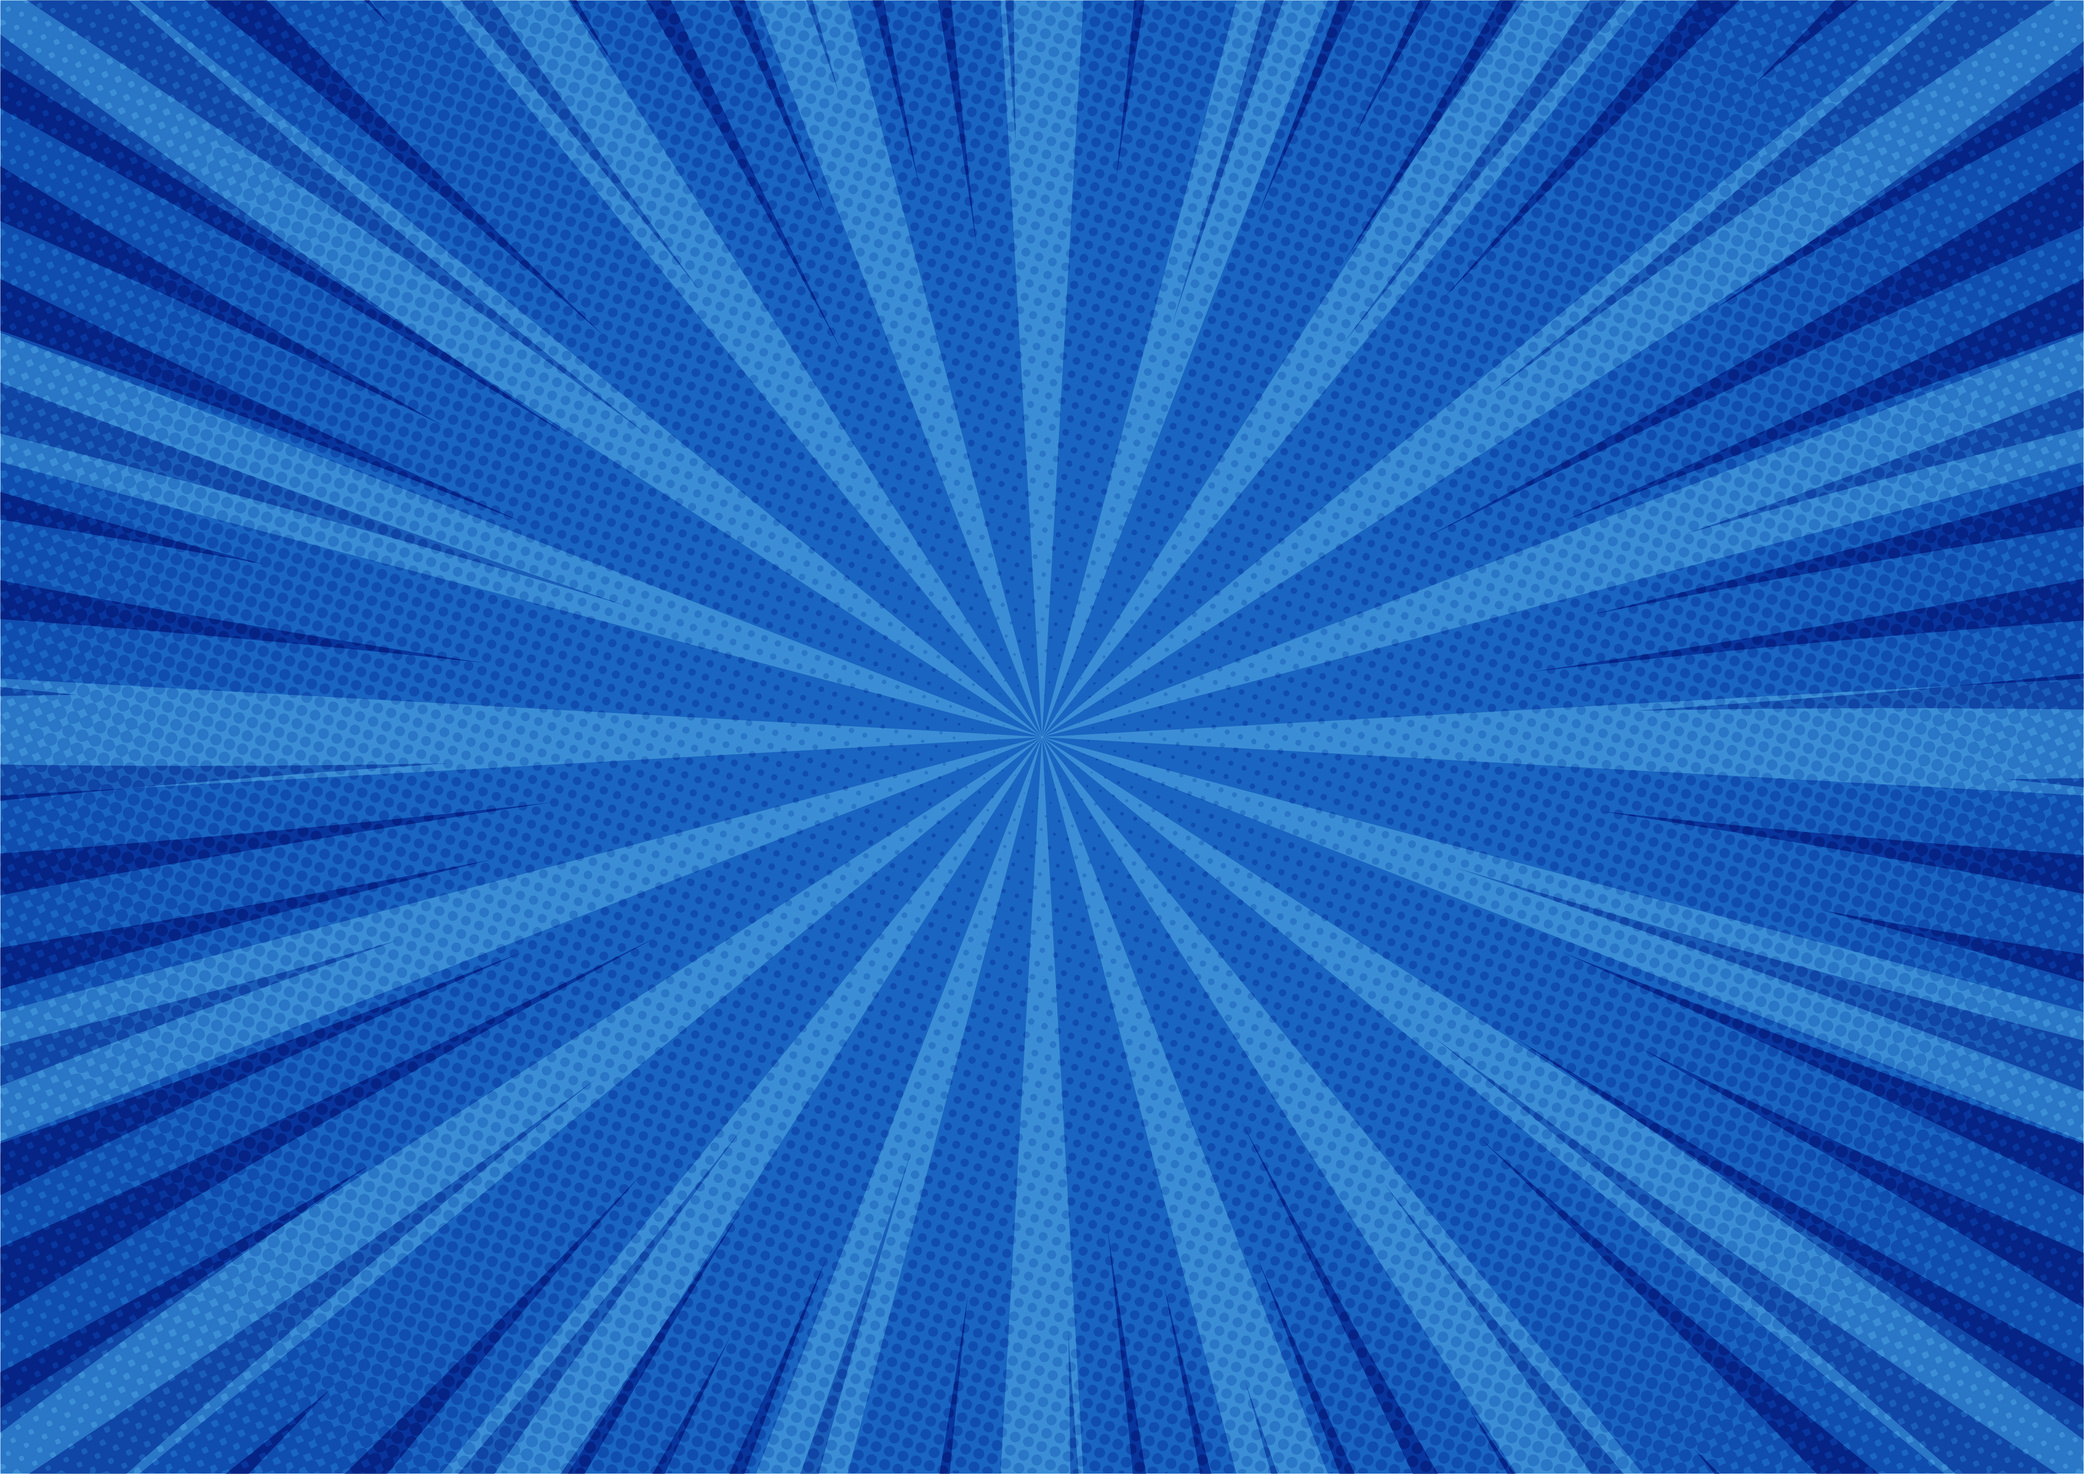 Abstract Comic Blue Background Cartoon Style. Sunlight.